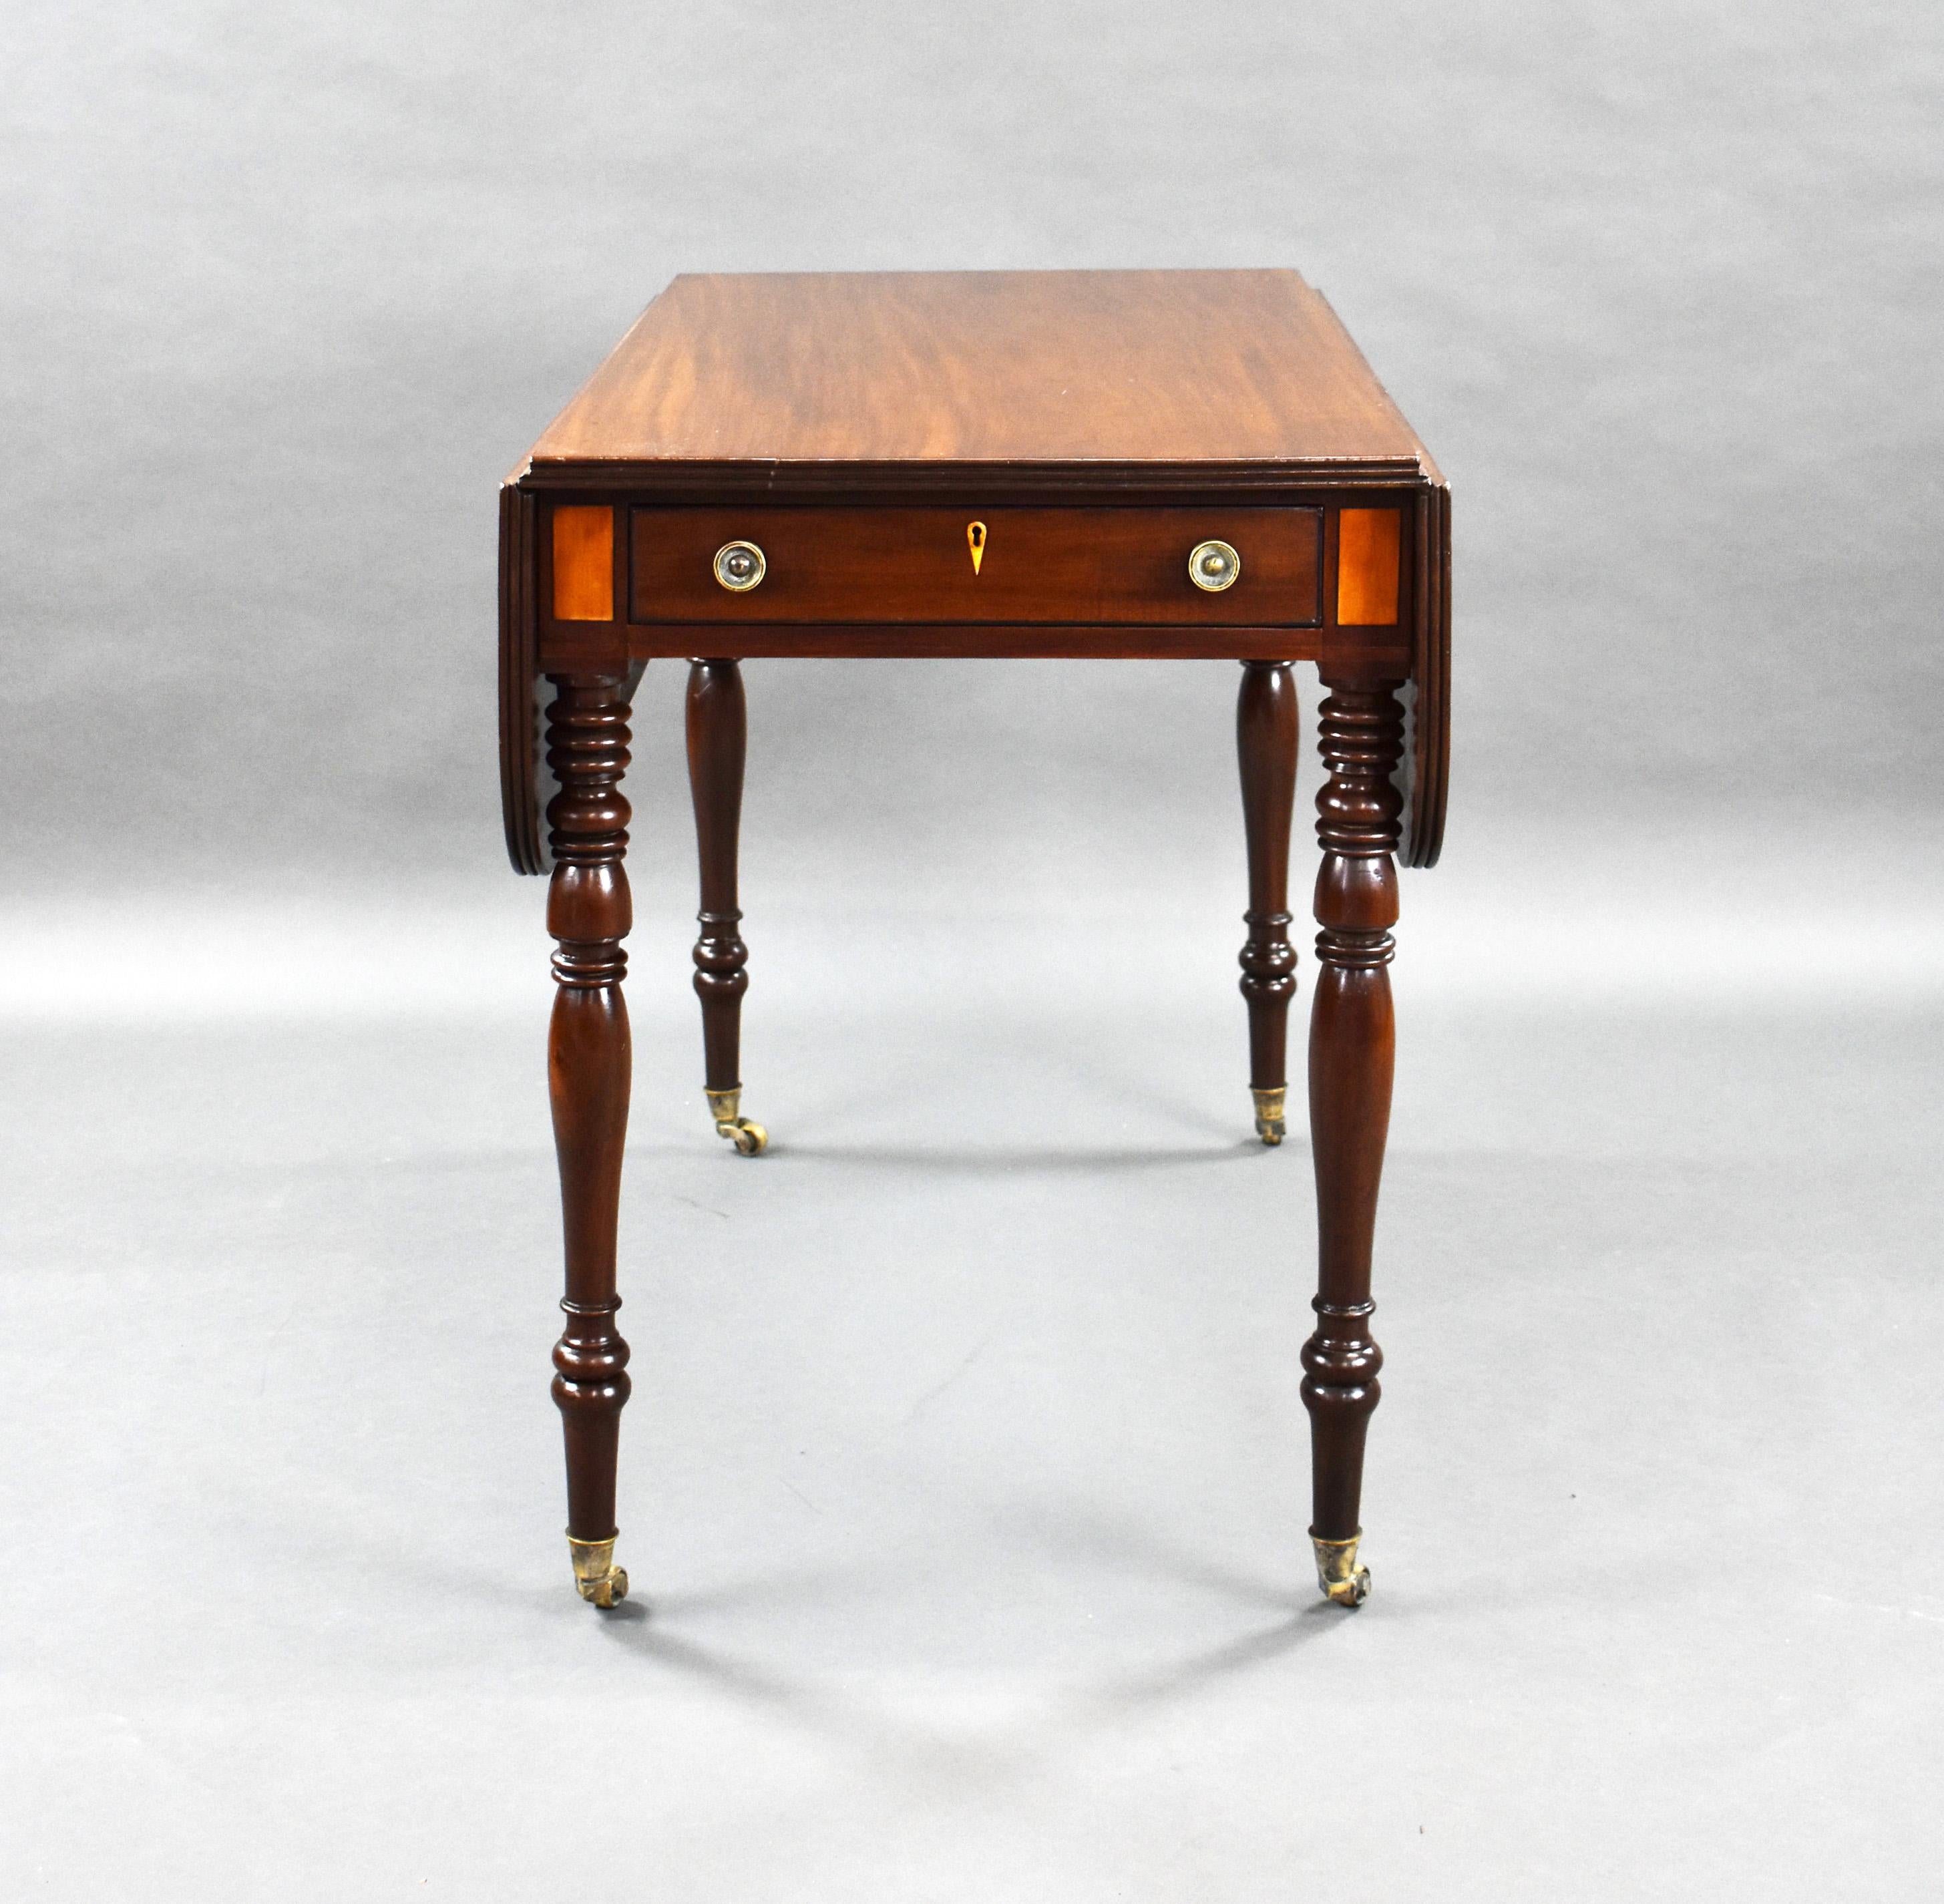 19th Century English Regency Mahogany Drop Leaf Pembroke Table In Good Condition For Sale In Chelmsford, Essex